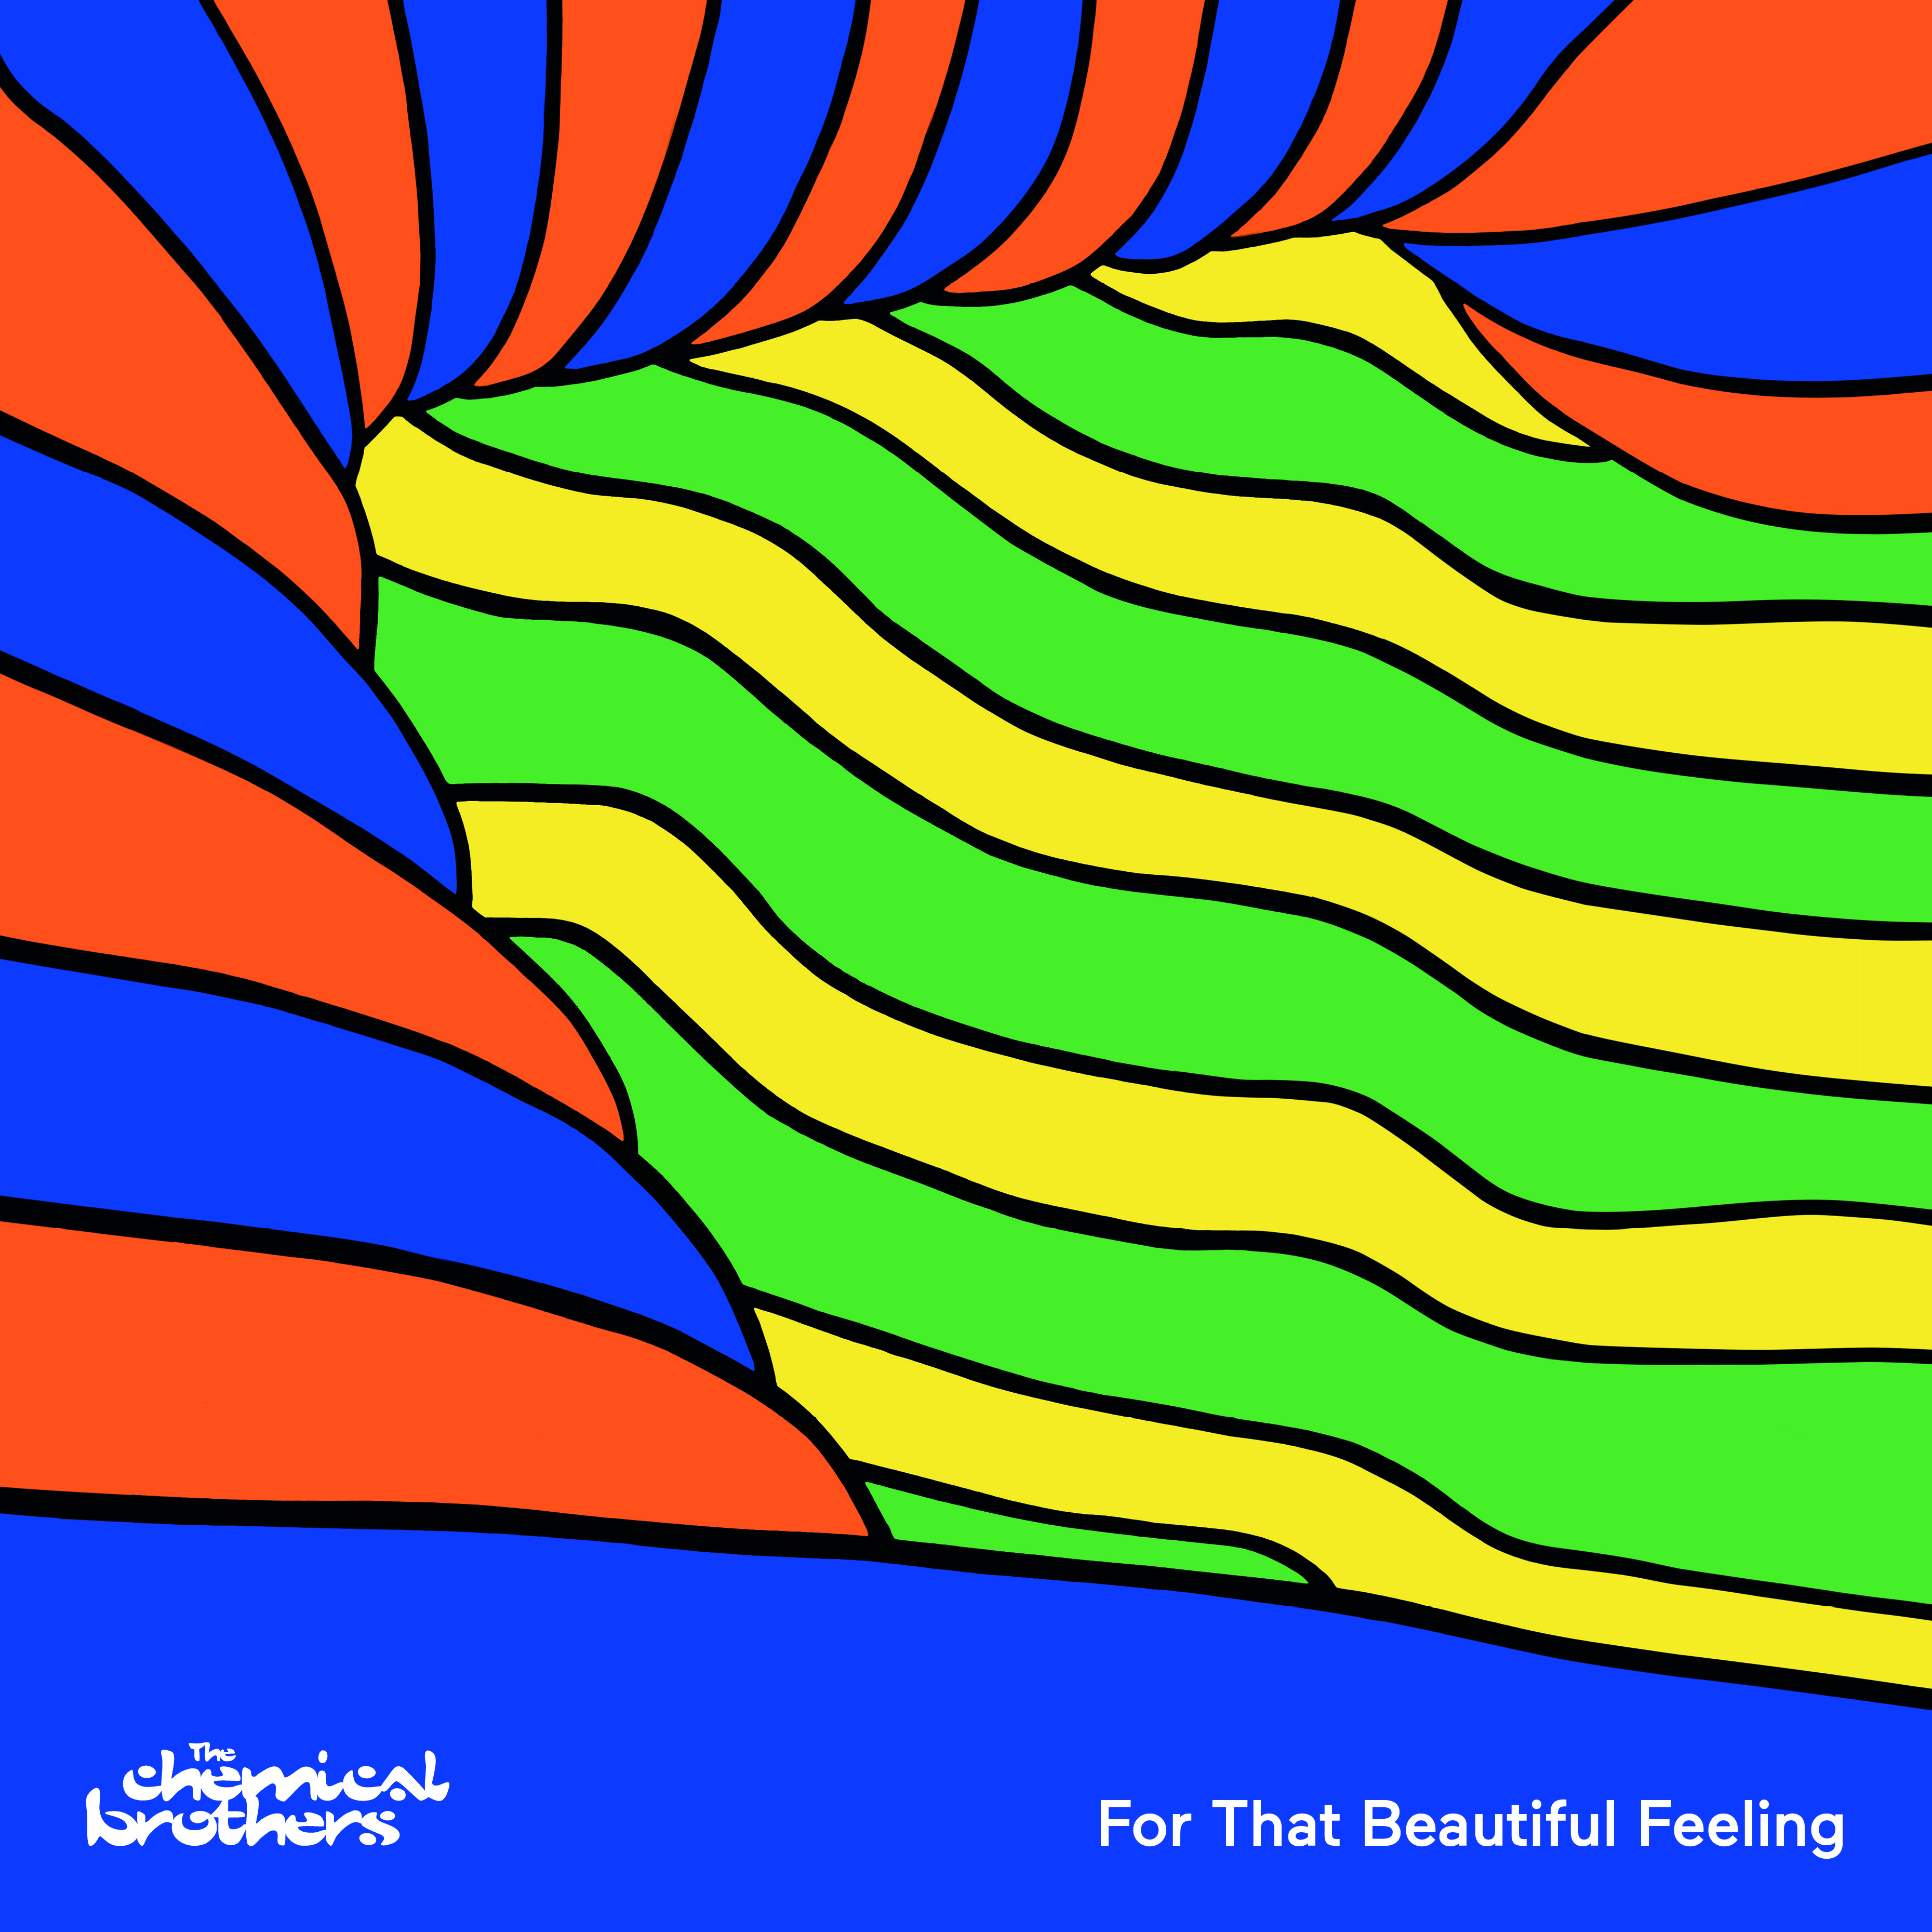 Новая музыка. The Chemical Brothers. For That Beautiful Feeling 